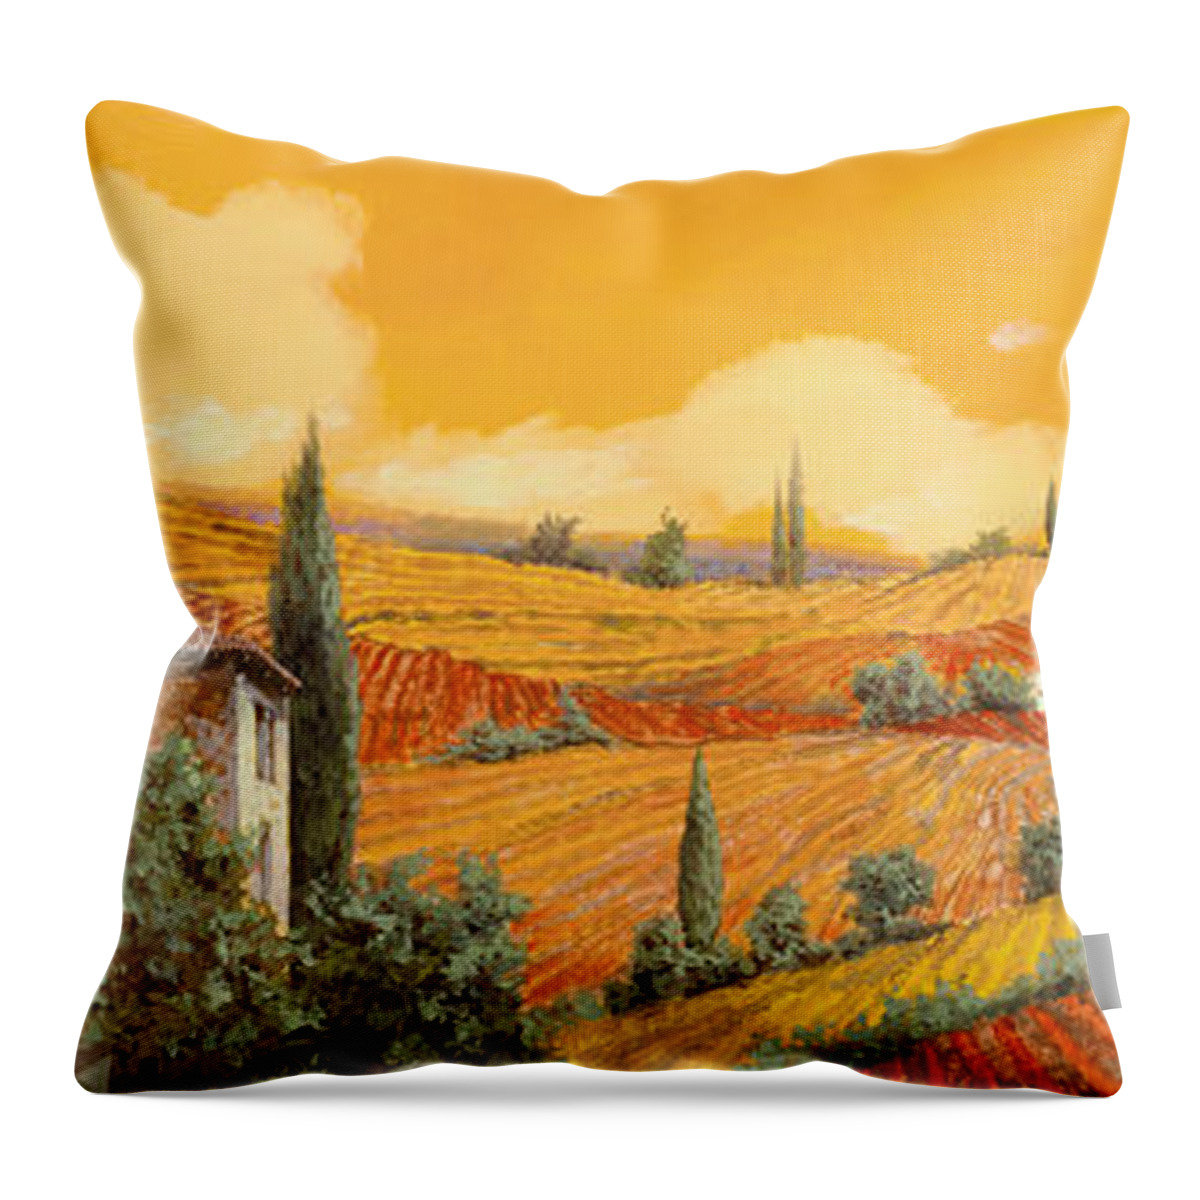 Tuscany Throw Pillow featuring the painting la terra di Siena by Guido Borelli